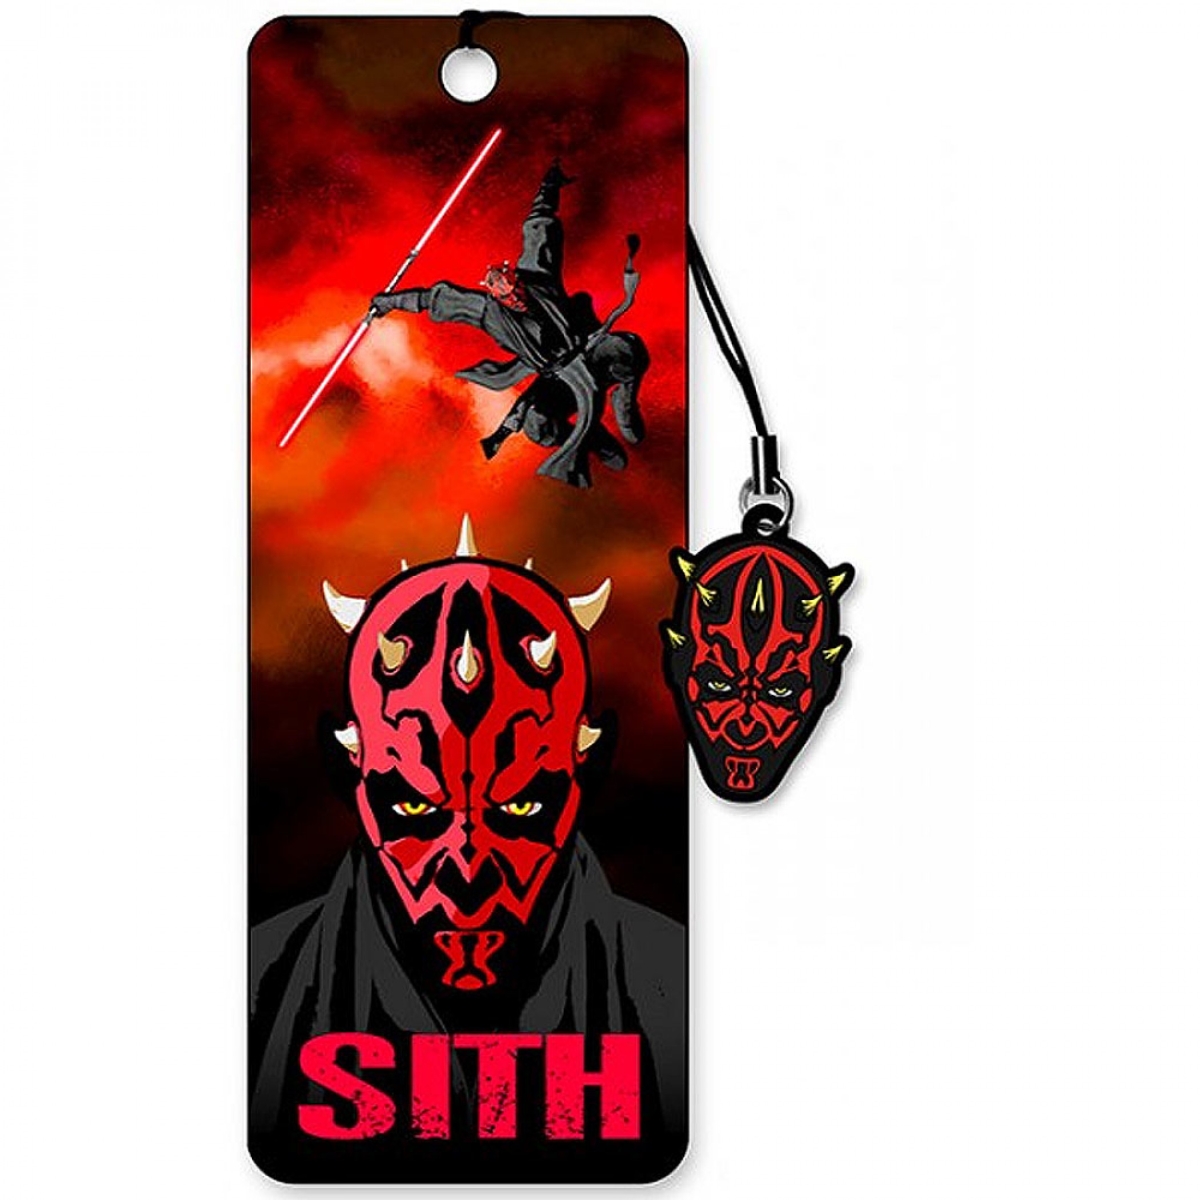 Picture of Star Wars 797842 Star Wars Darth Maul 3D Moving Image Bookmark